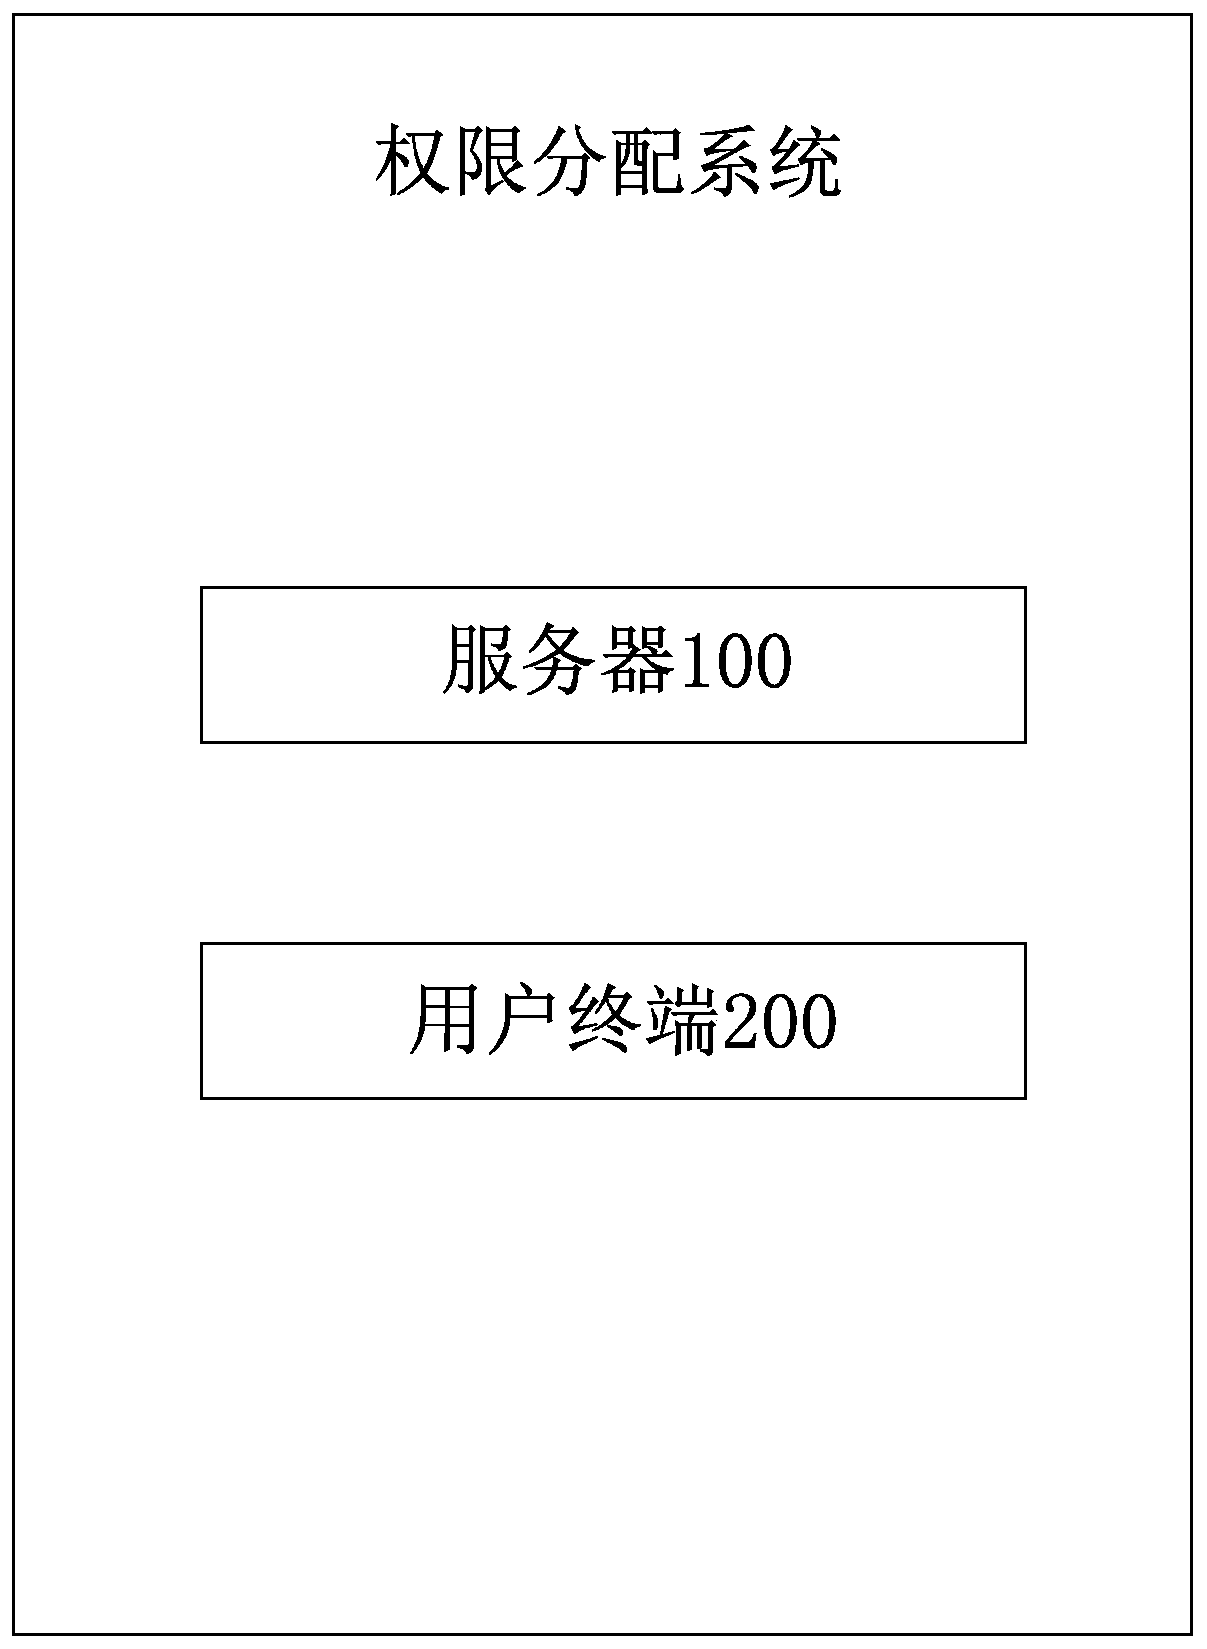 A hierarchical organization structure account permission allocation method and system and a storage medium